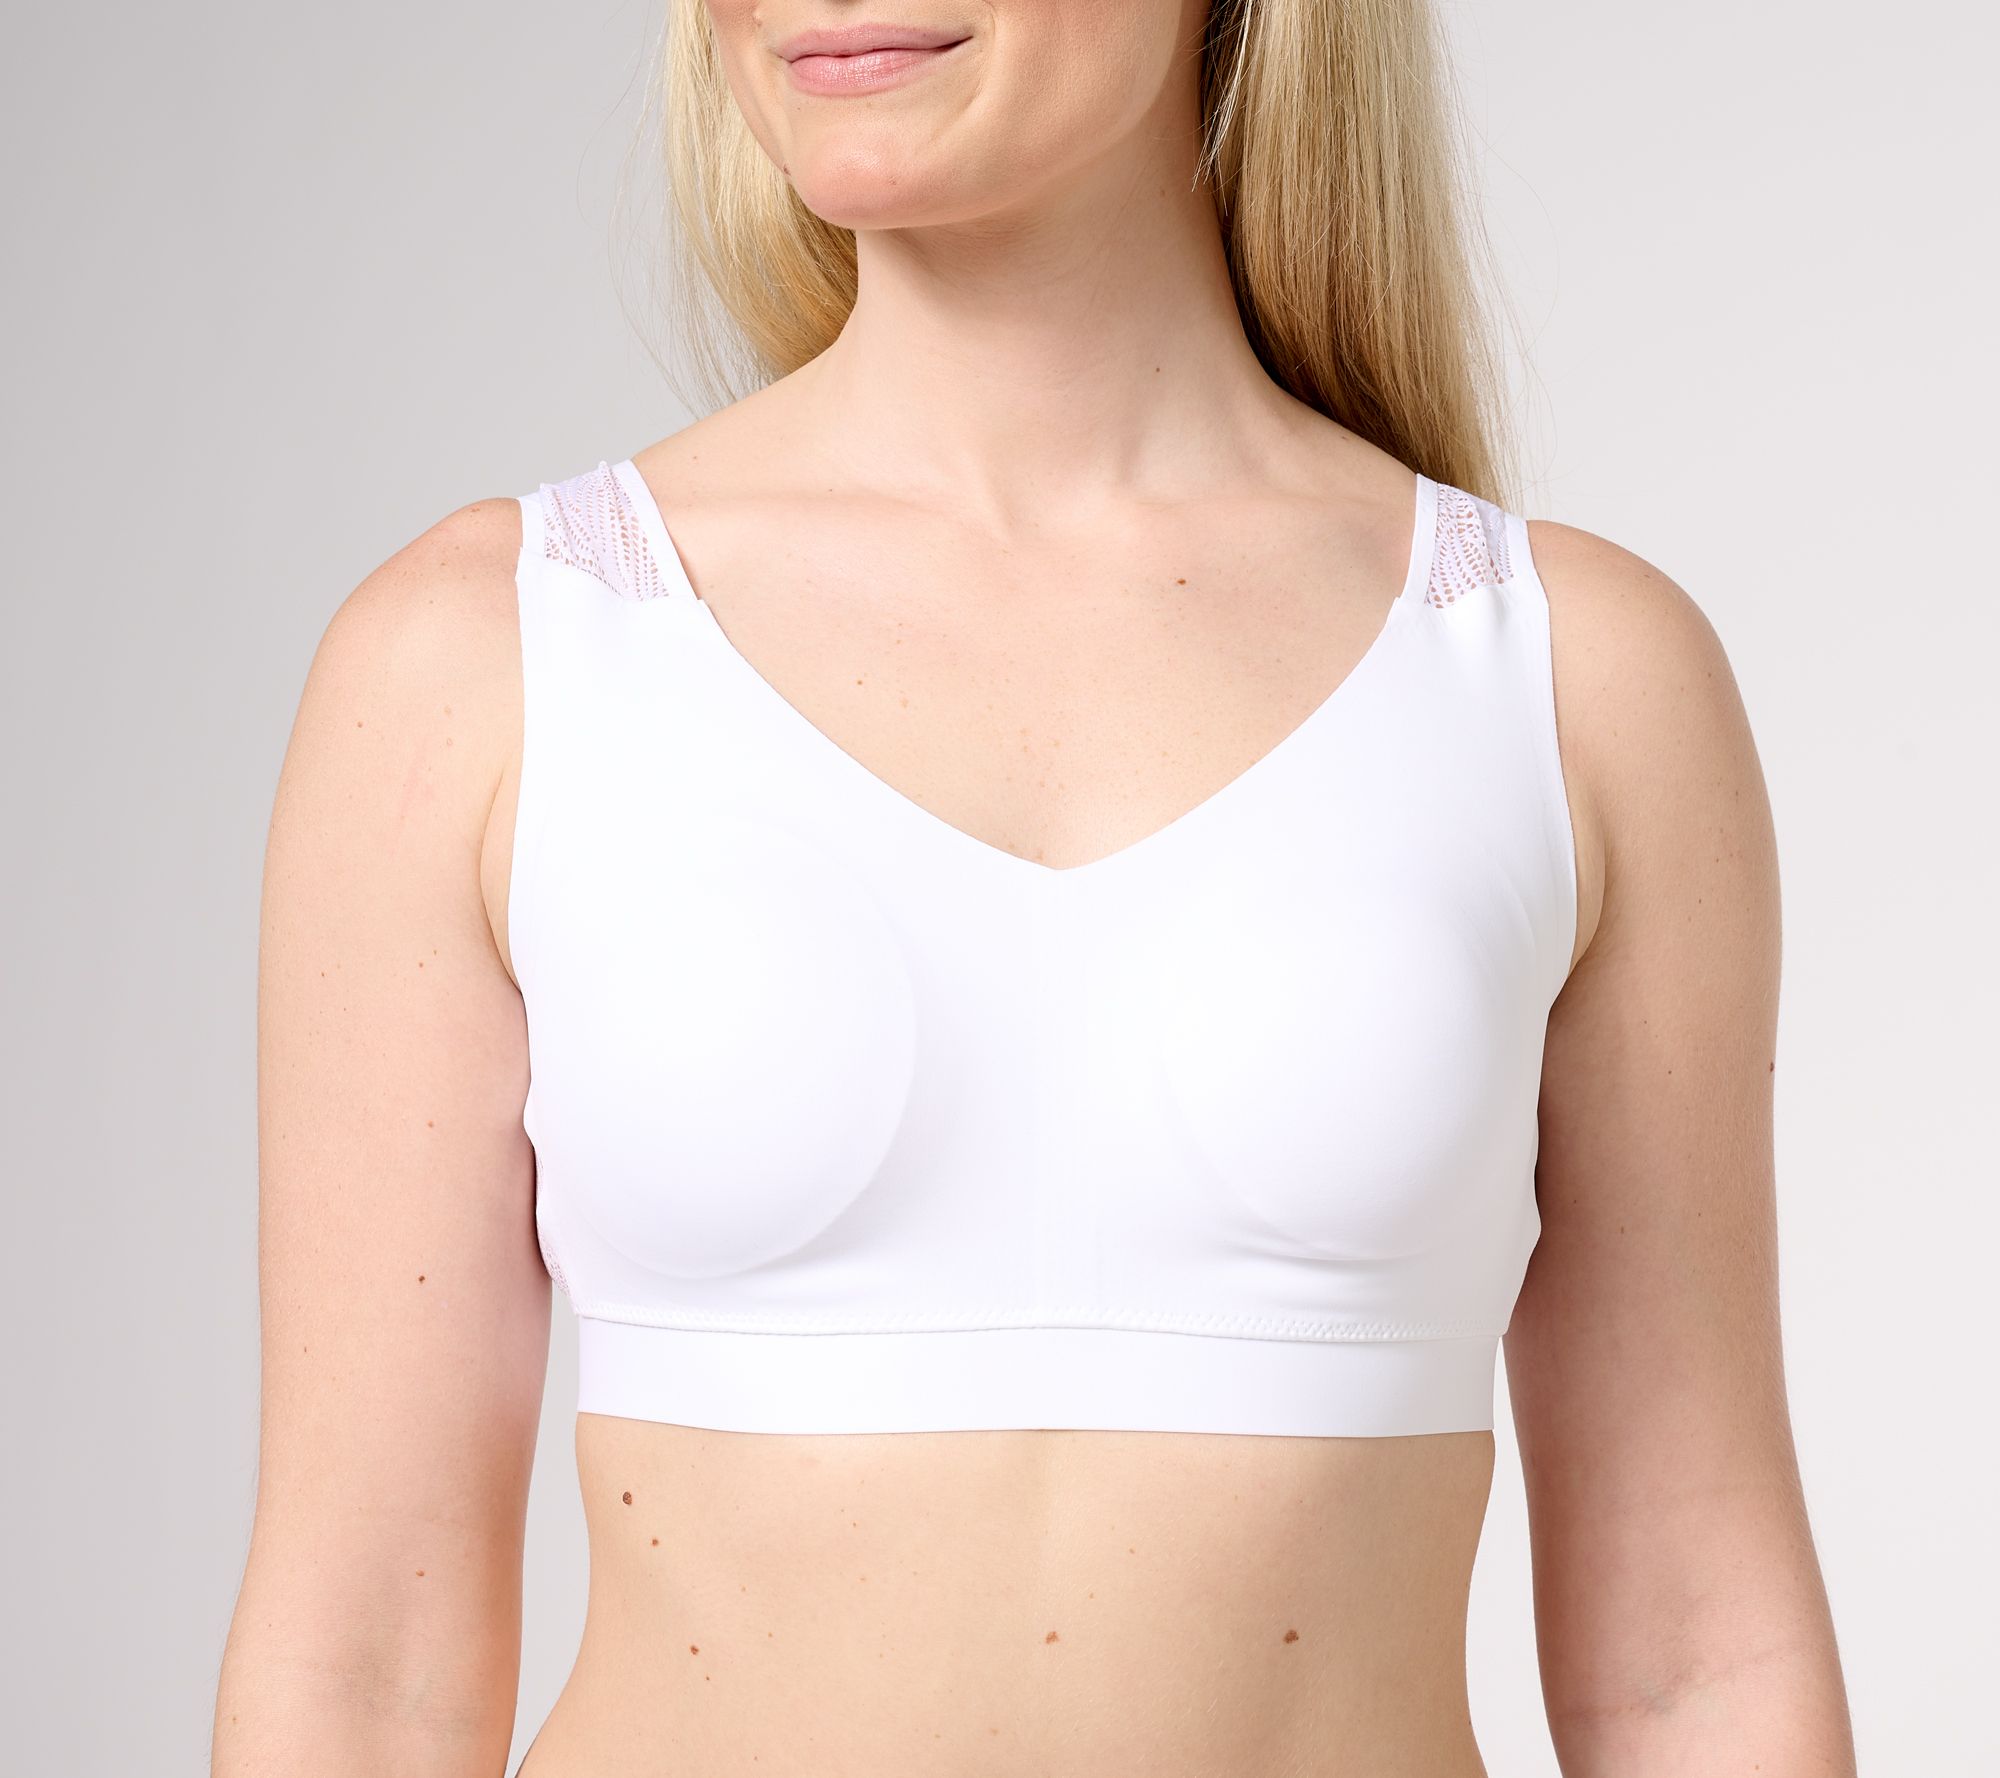 Women's Padded Casual Bra Vest Built-in Bra S-xl/8 Colors Available